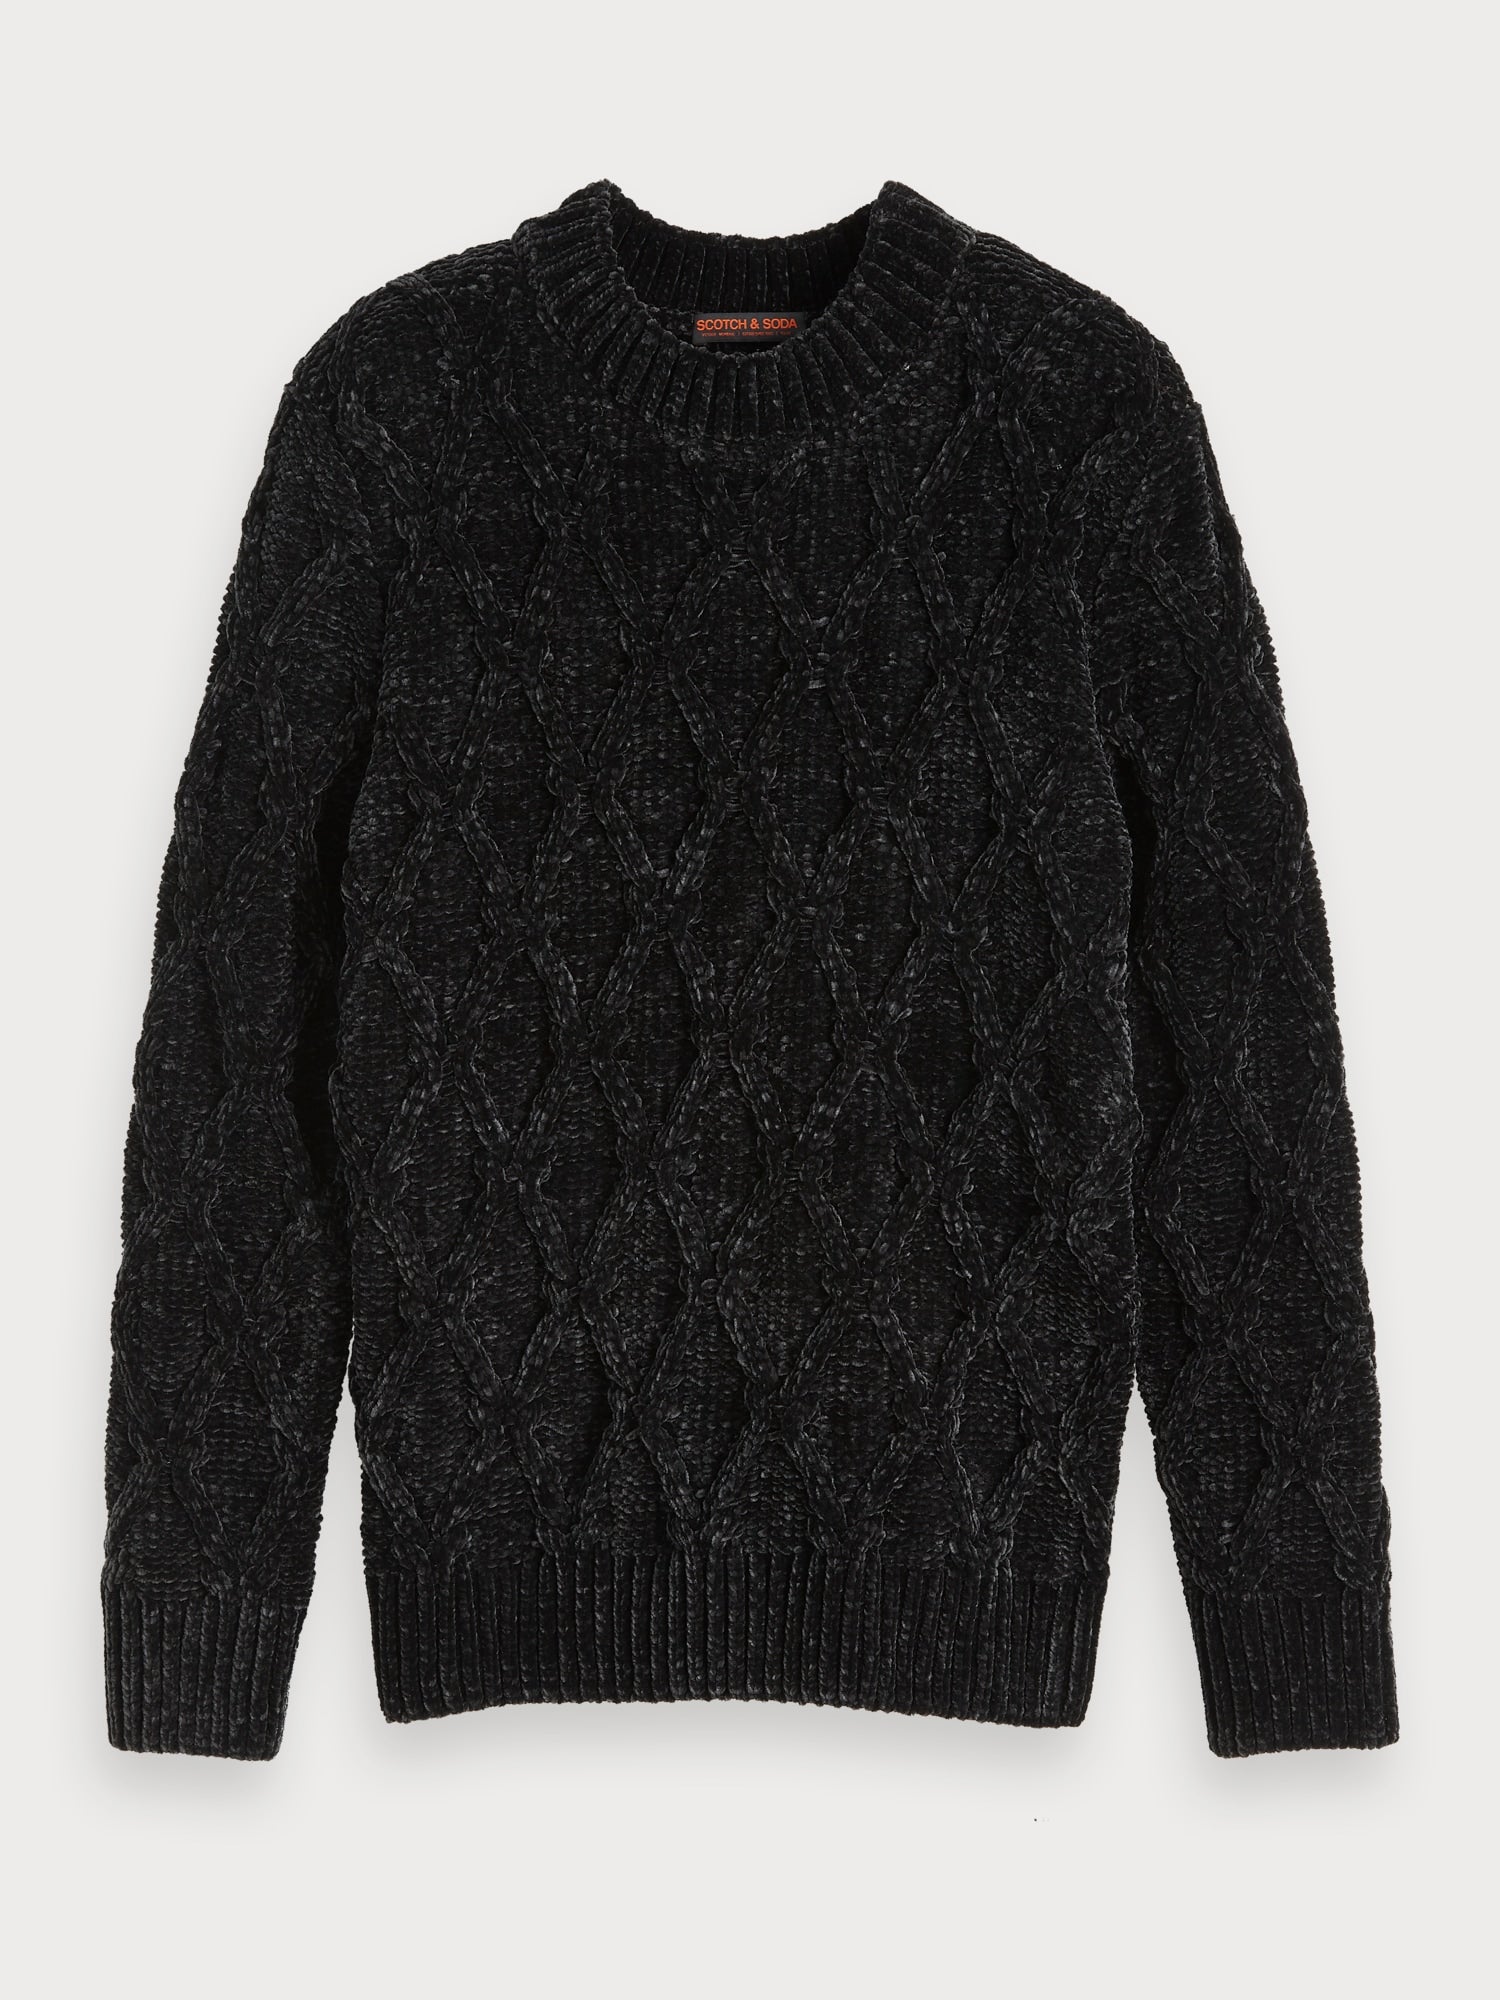 Scotch and Soda | Cable Knit Chenille Sweater Black | Scotch Select